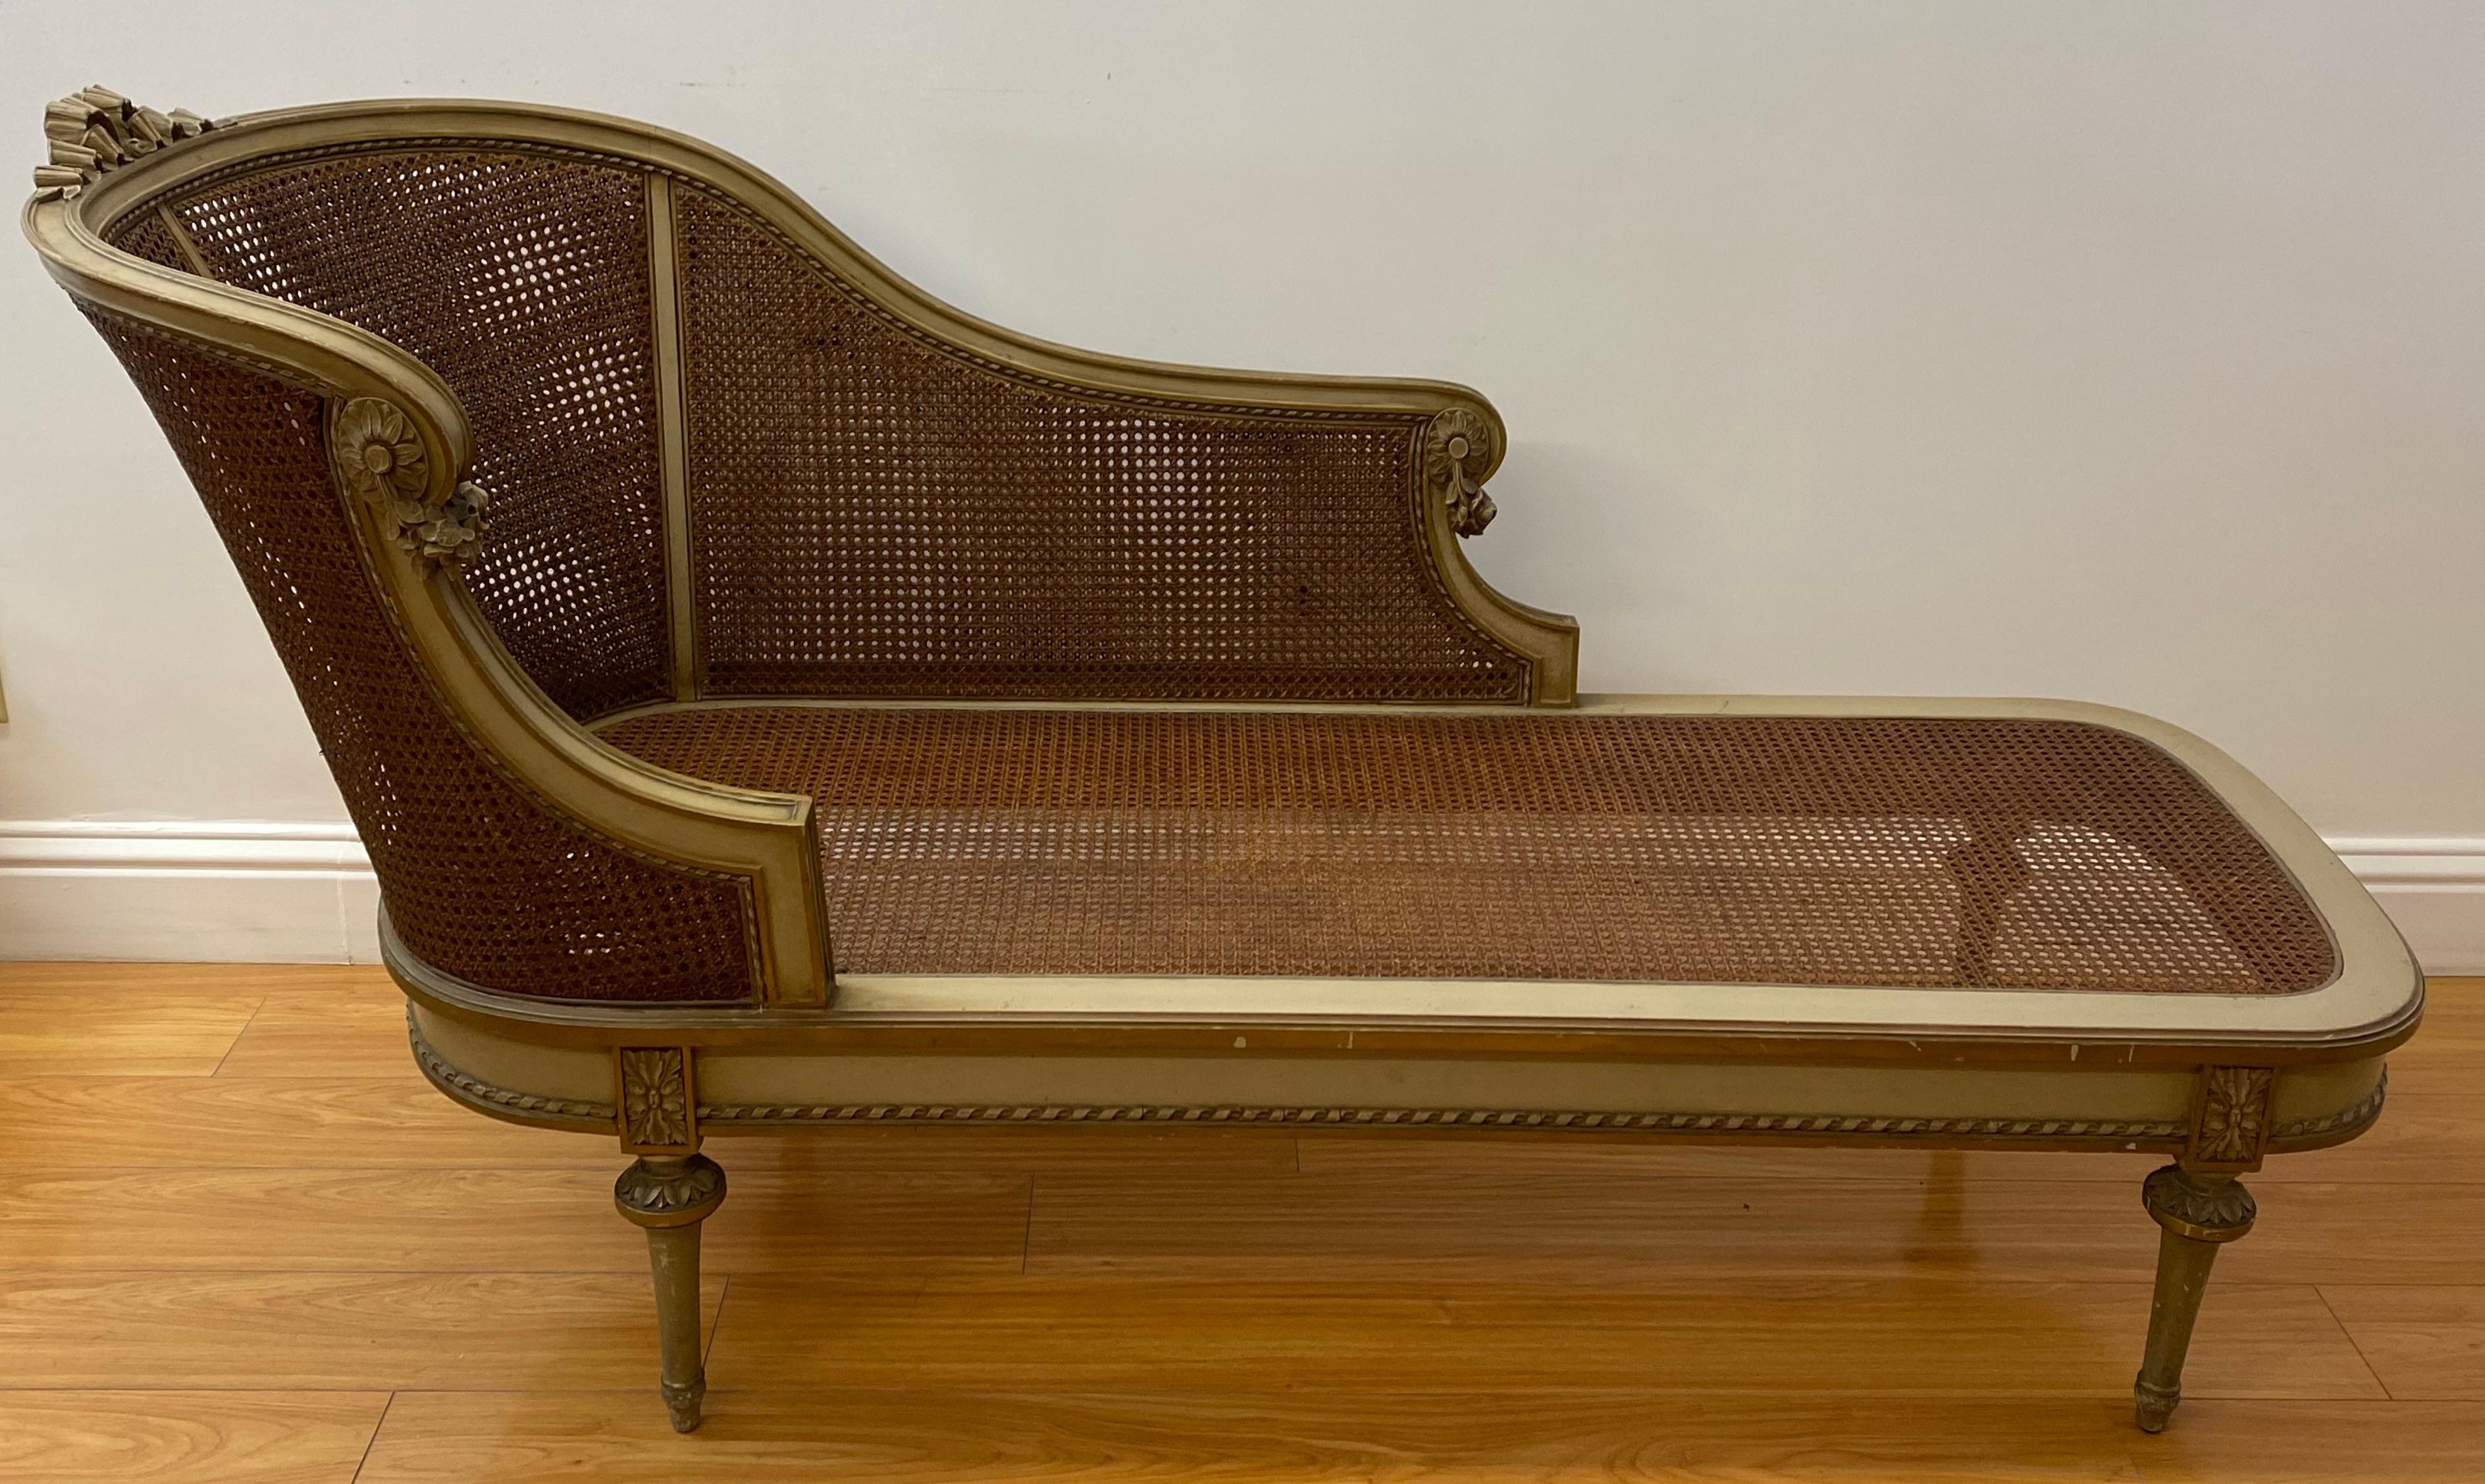 Early 20th century French chaise with restored caning

Outstanding hand carved French walnut chaise lounge with impeccable cane restoration.

The frame has ample remains of the original finish, and shows a few scuff marks throughout

The cane